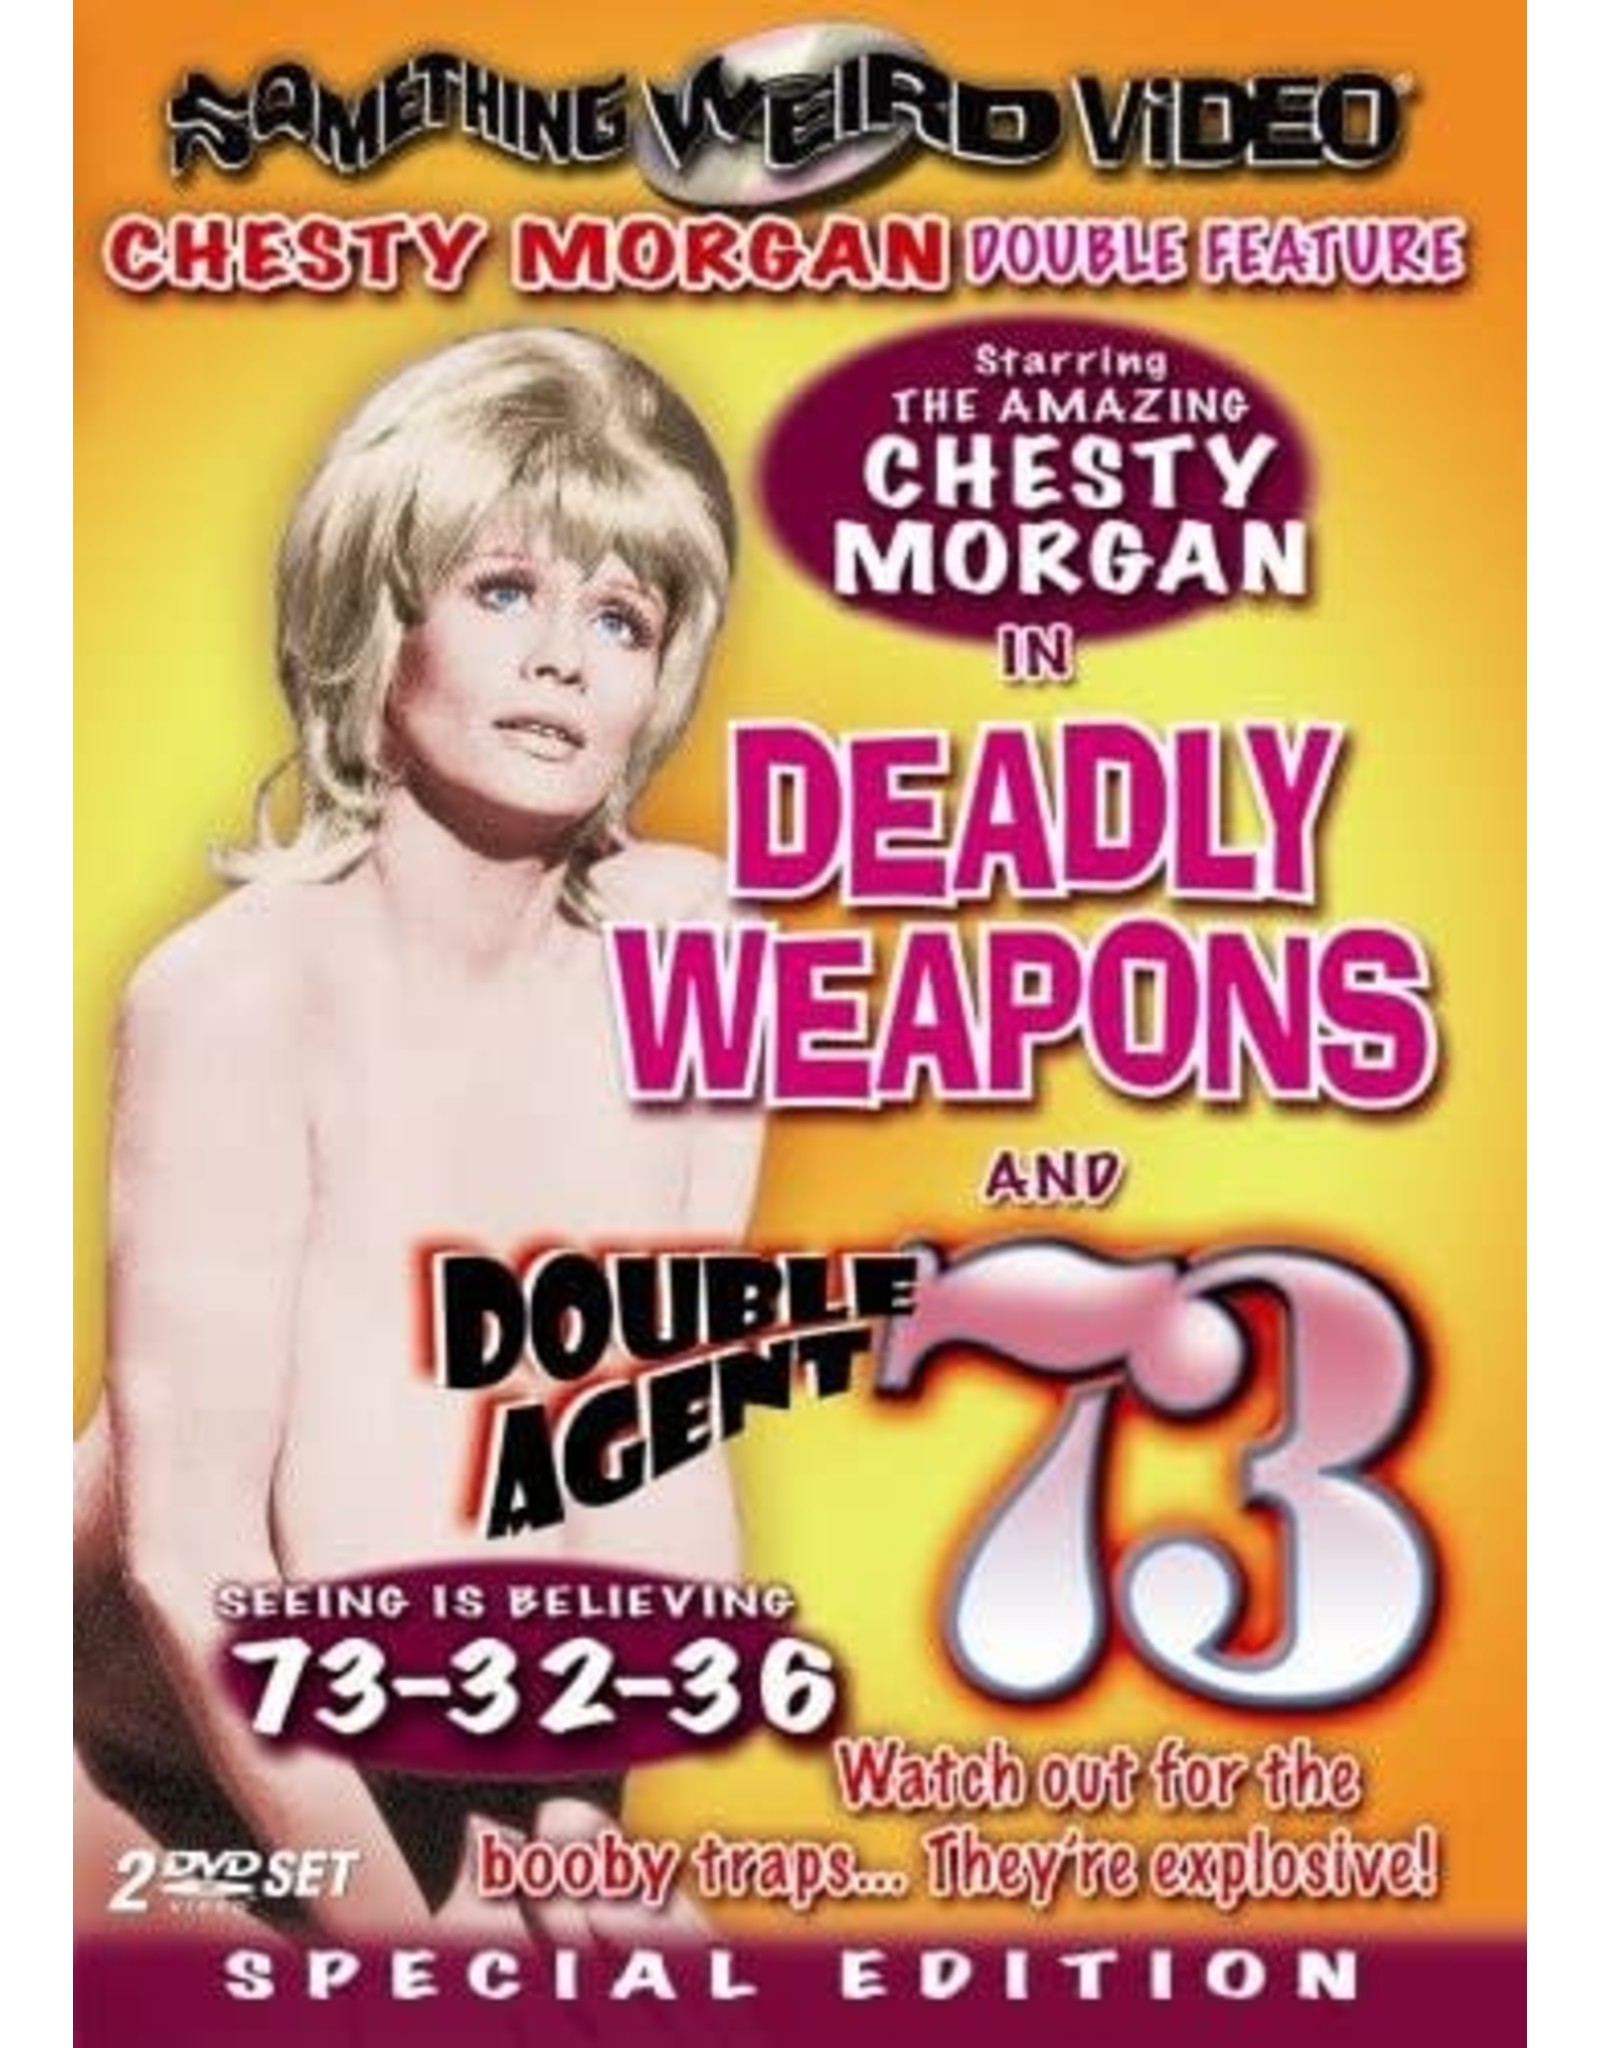 Cult & Cool Deadly Weapons / Double Agent Chesty Morgan Double Feature - Something Weird Video (Used)